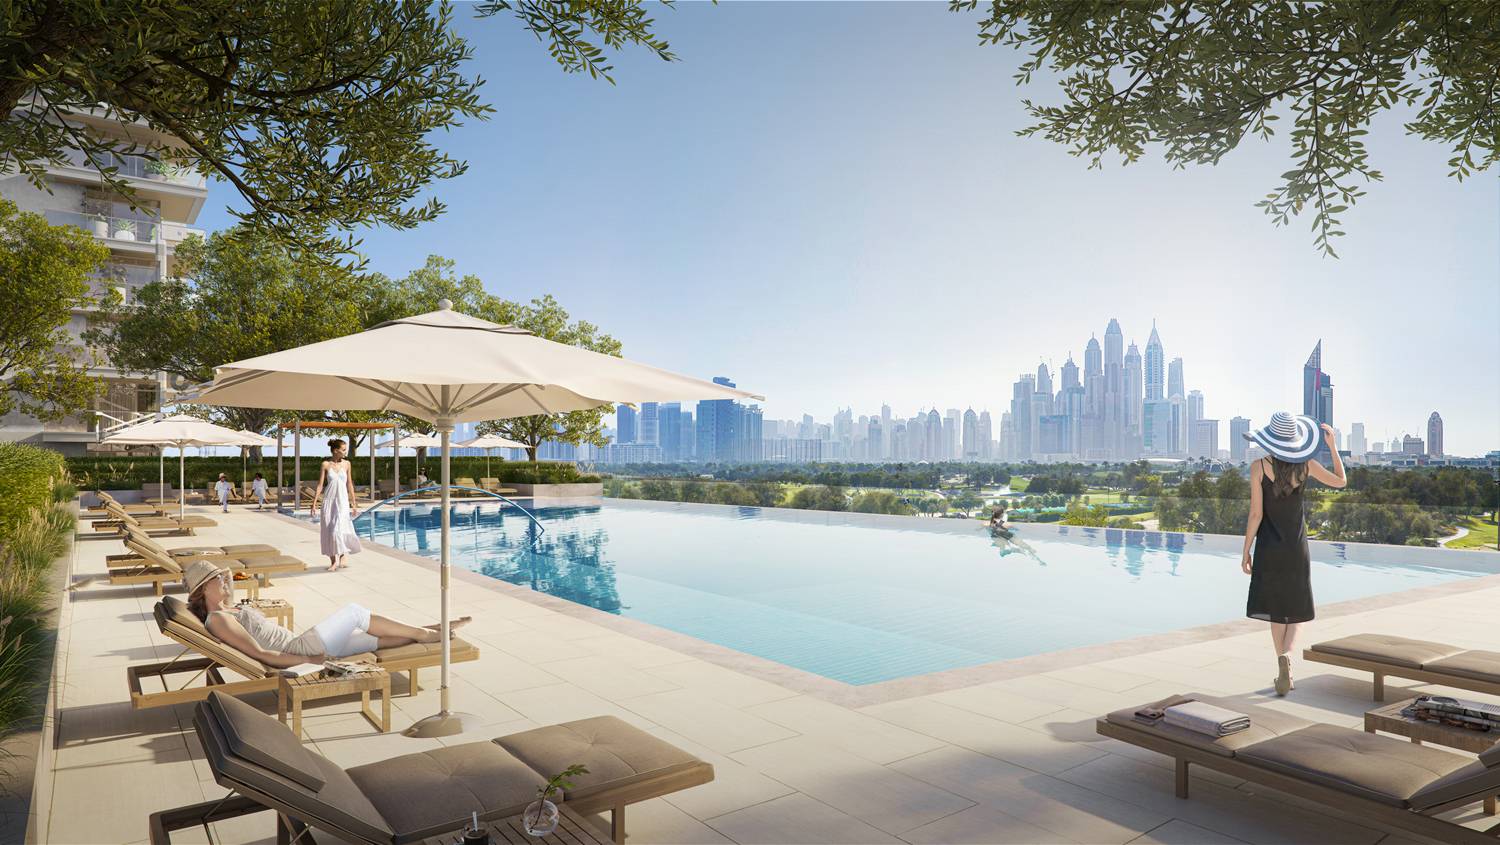 Pluses of purchasing new homes in Dubai